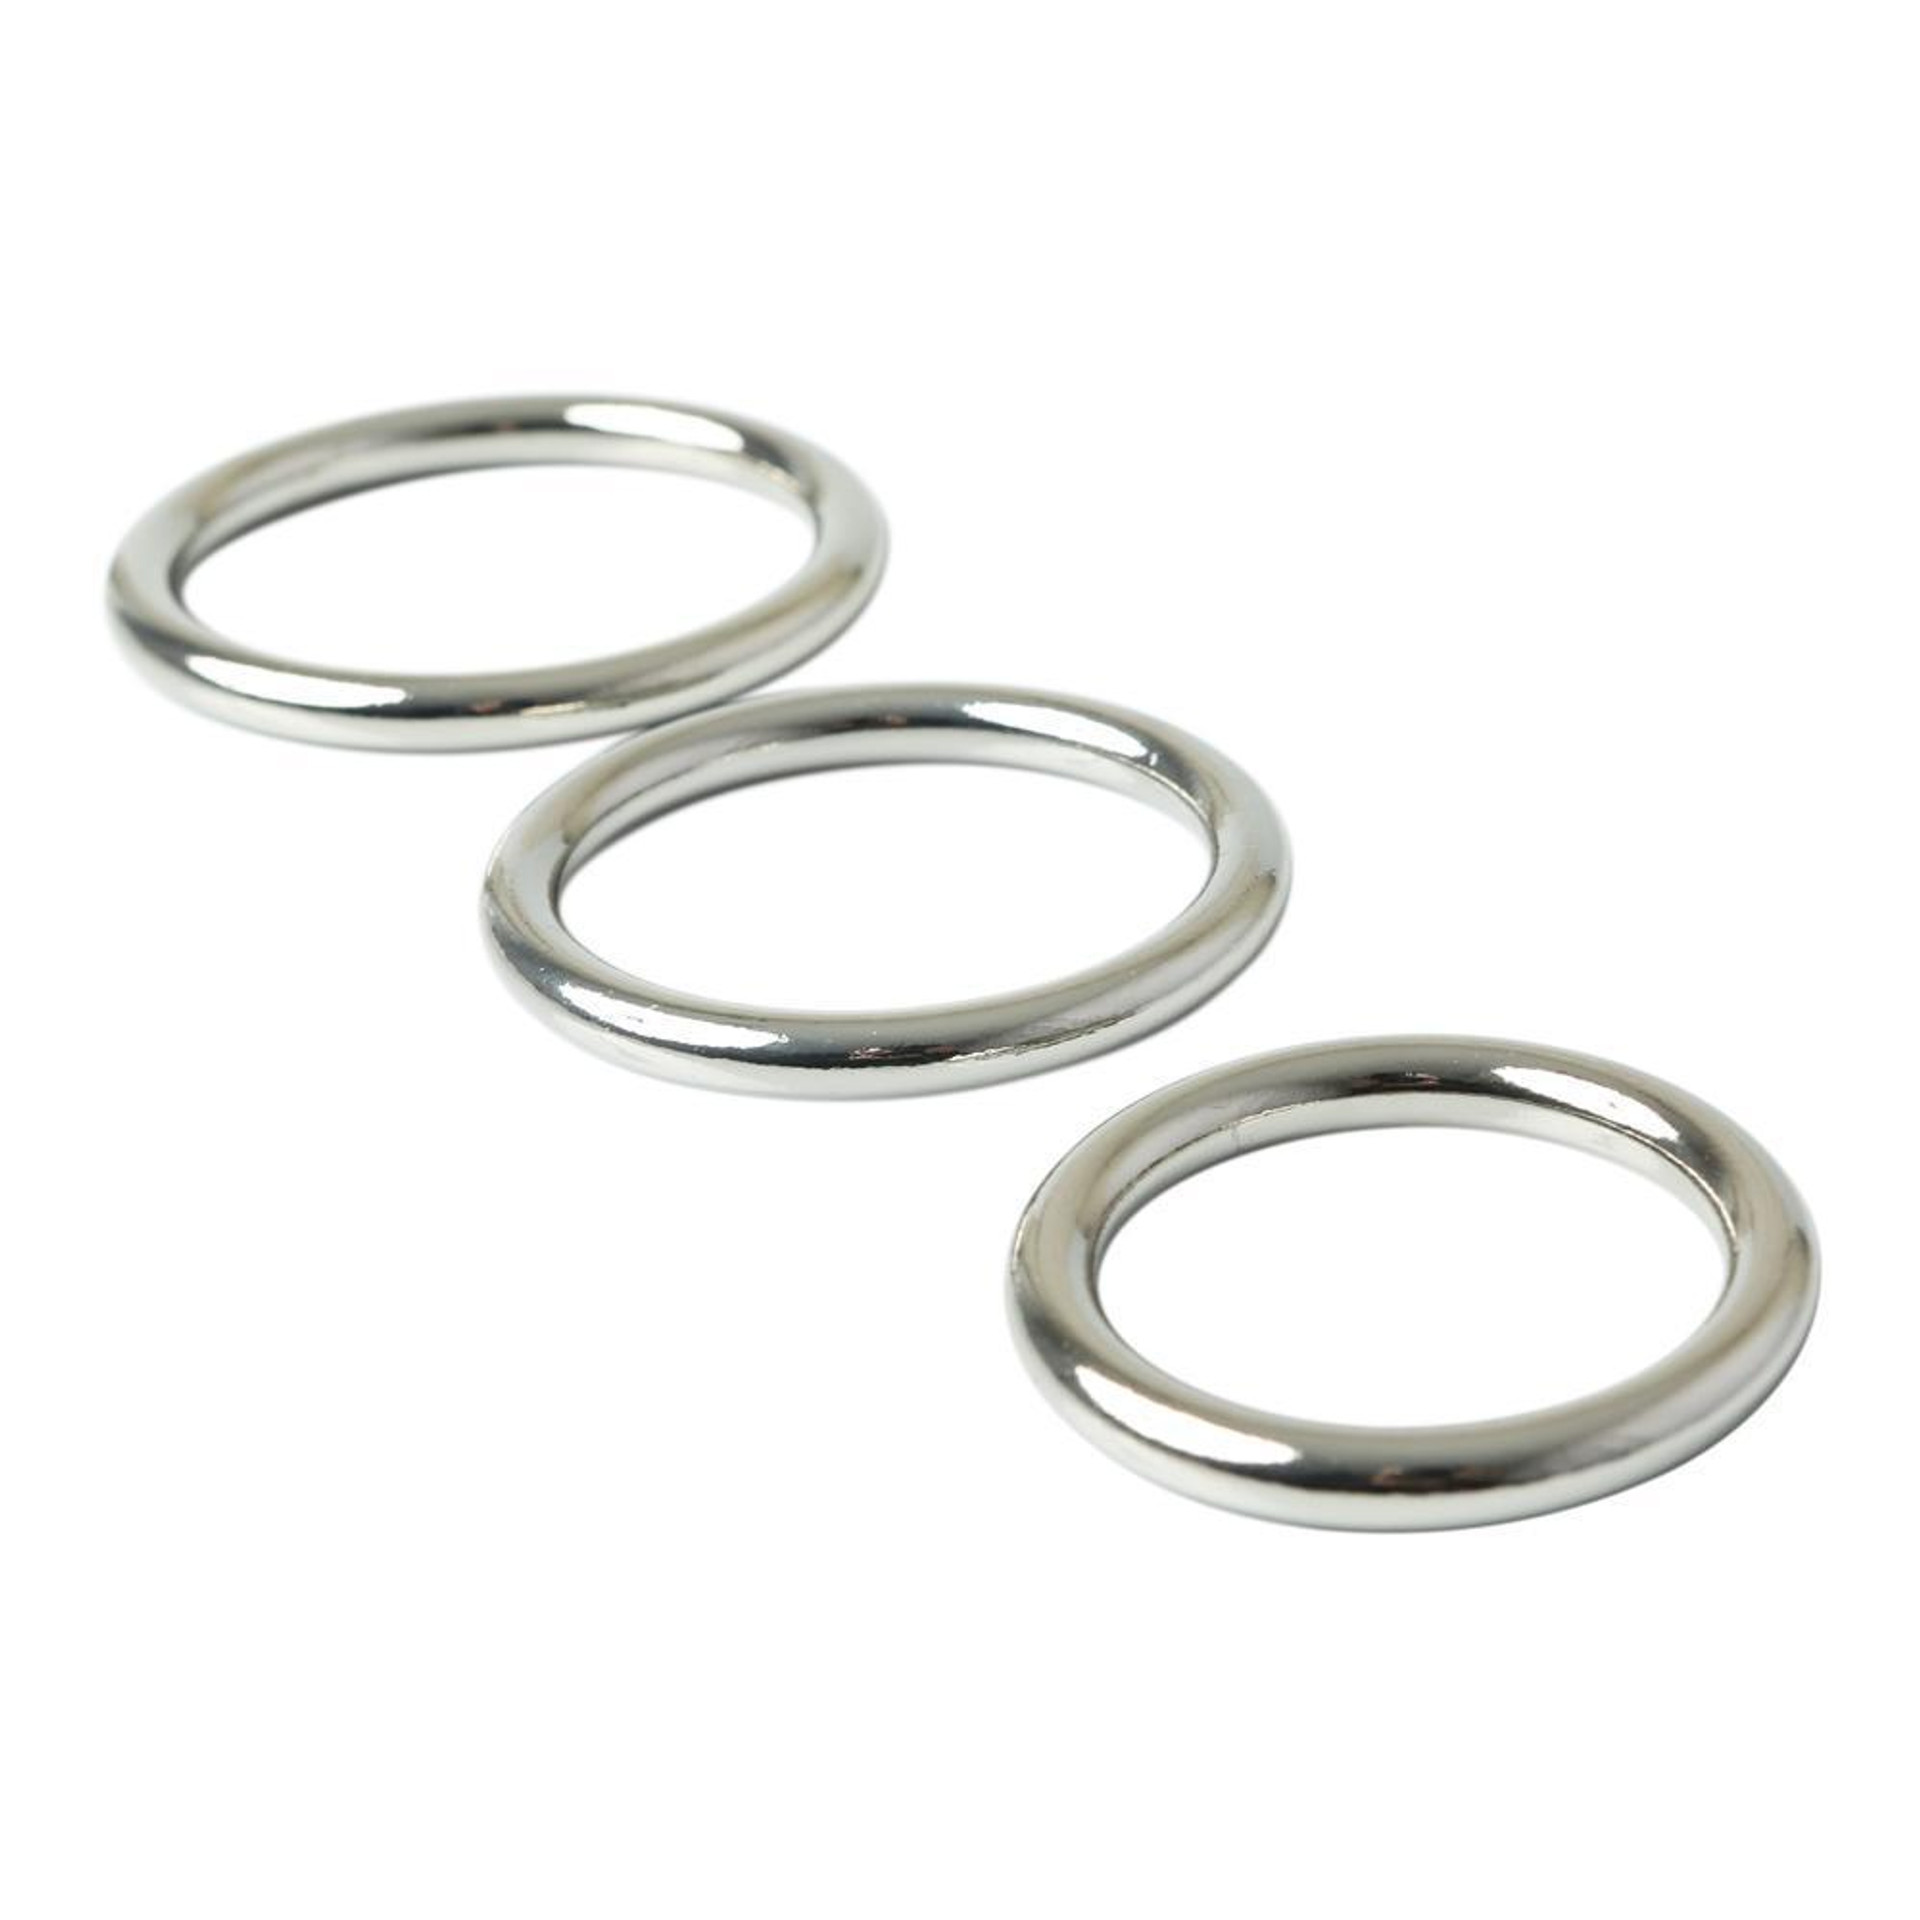 Buy the Seamless Metal O-Ring 3 Pack for O-ring strap-on harness ...